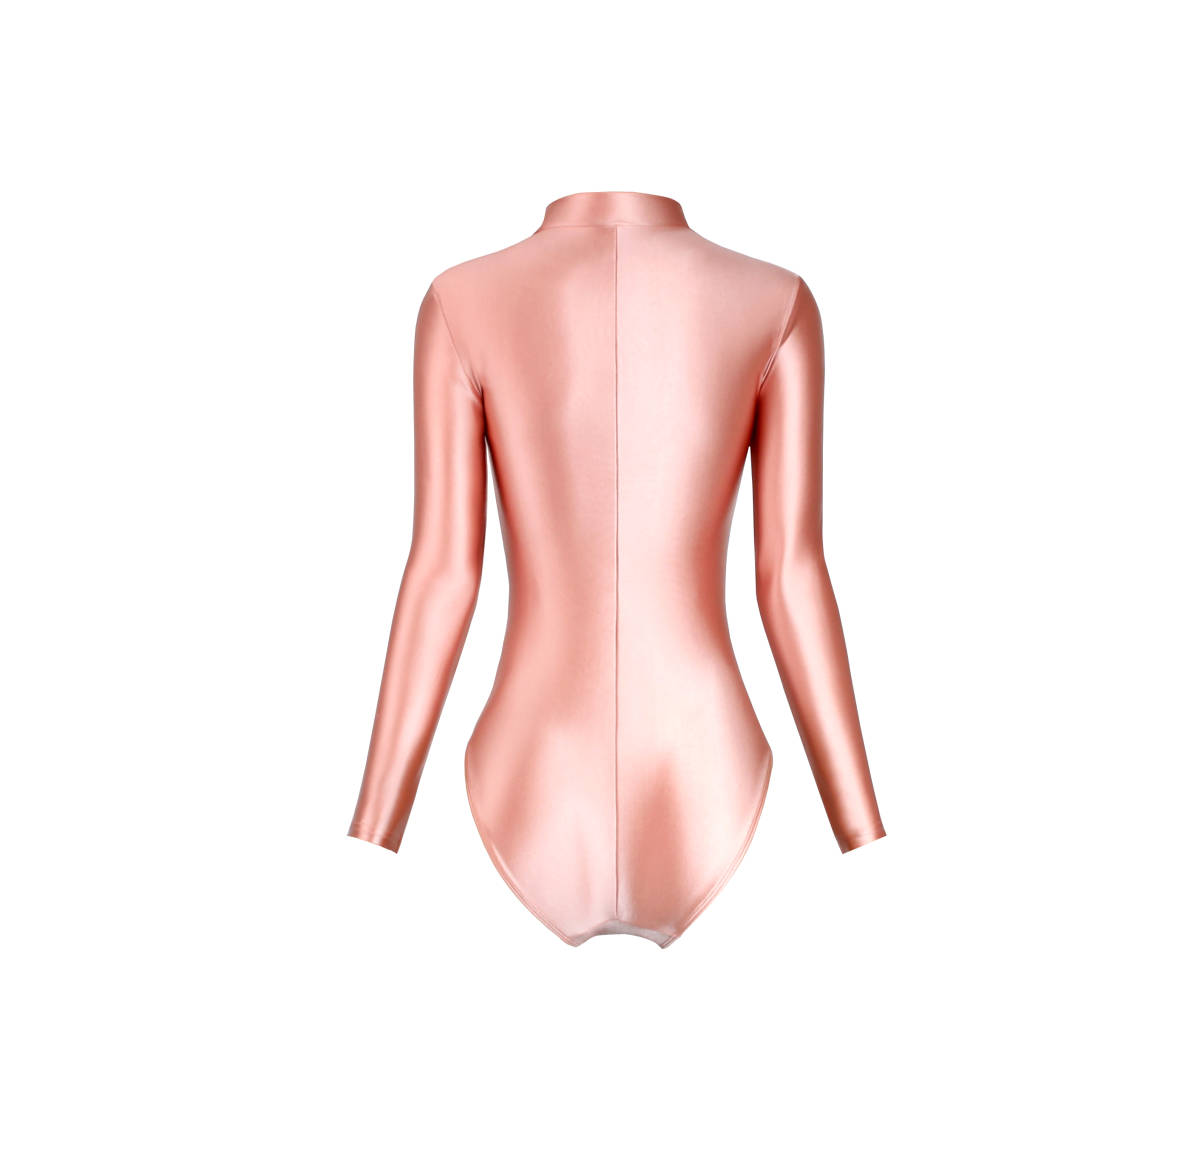 MJINM zentai suit high‐necked long sleeve body suit front jipa yoga suit sexy costume play clothes pink 